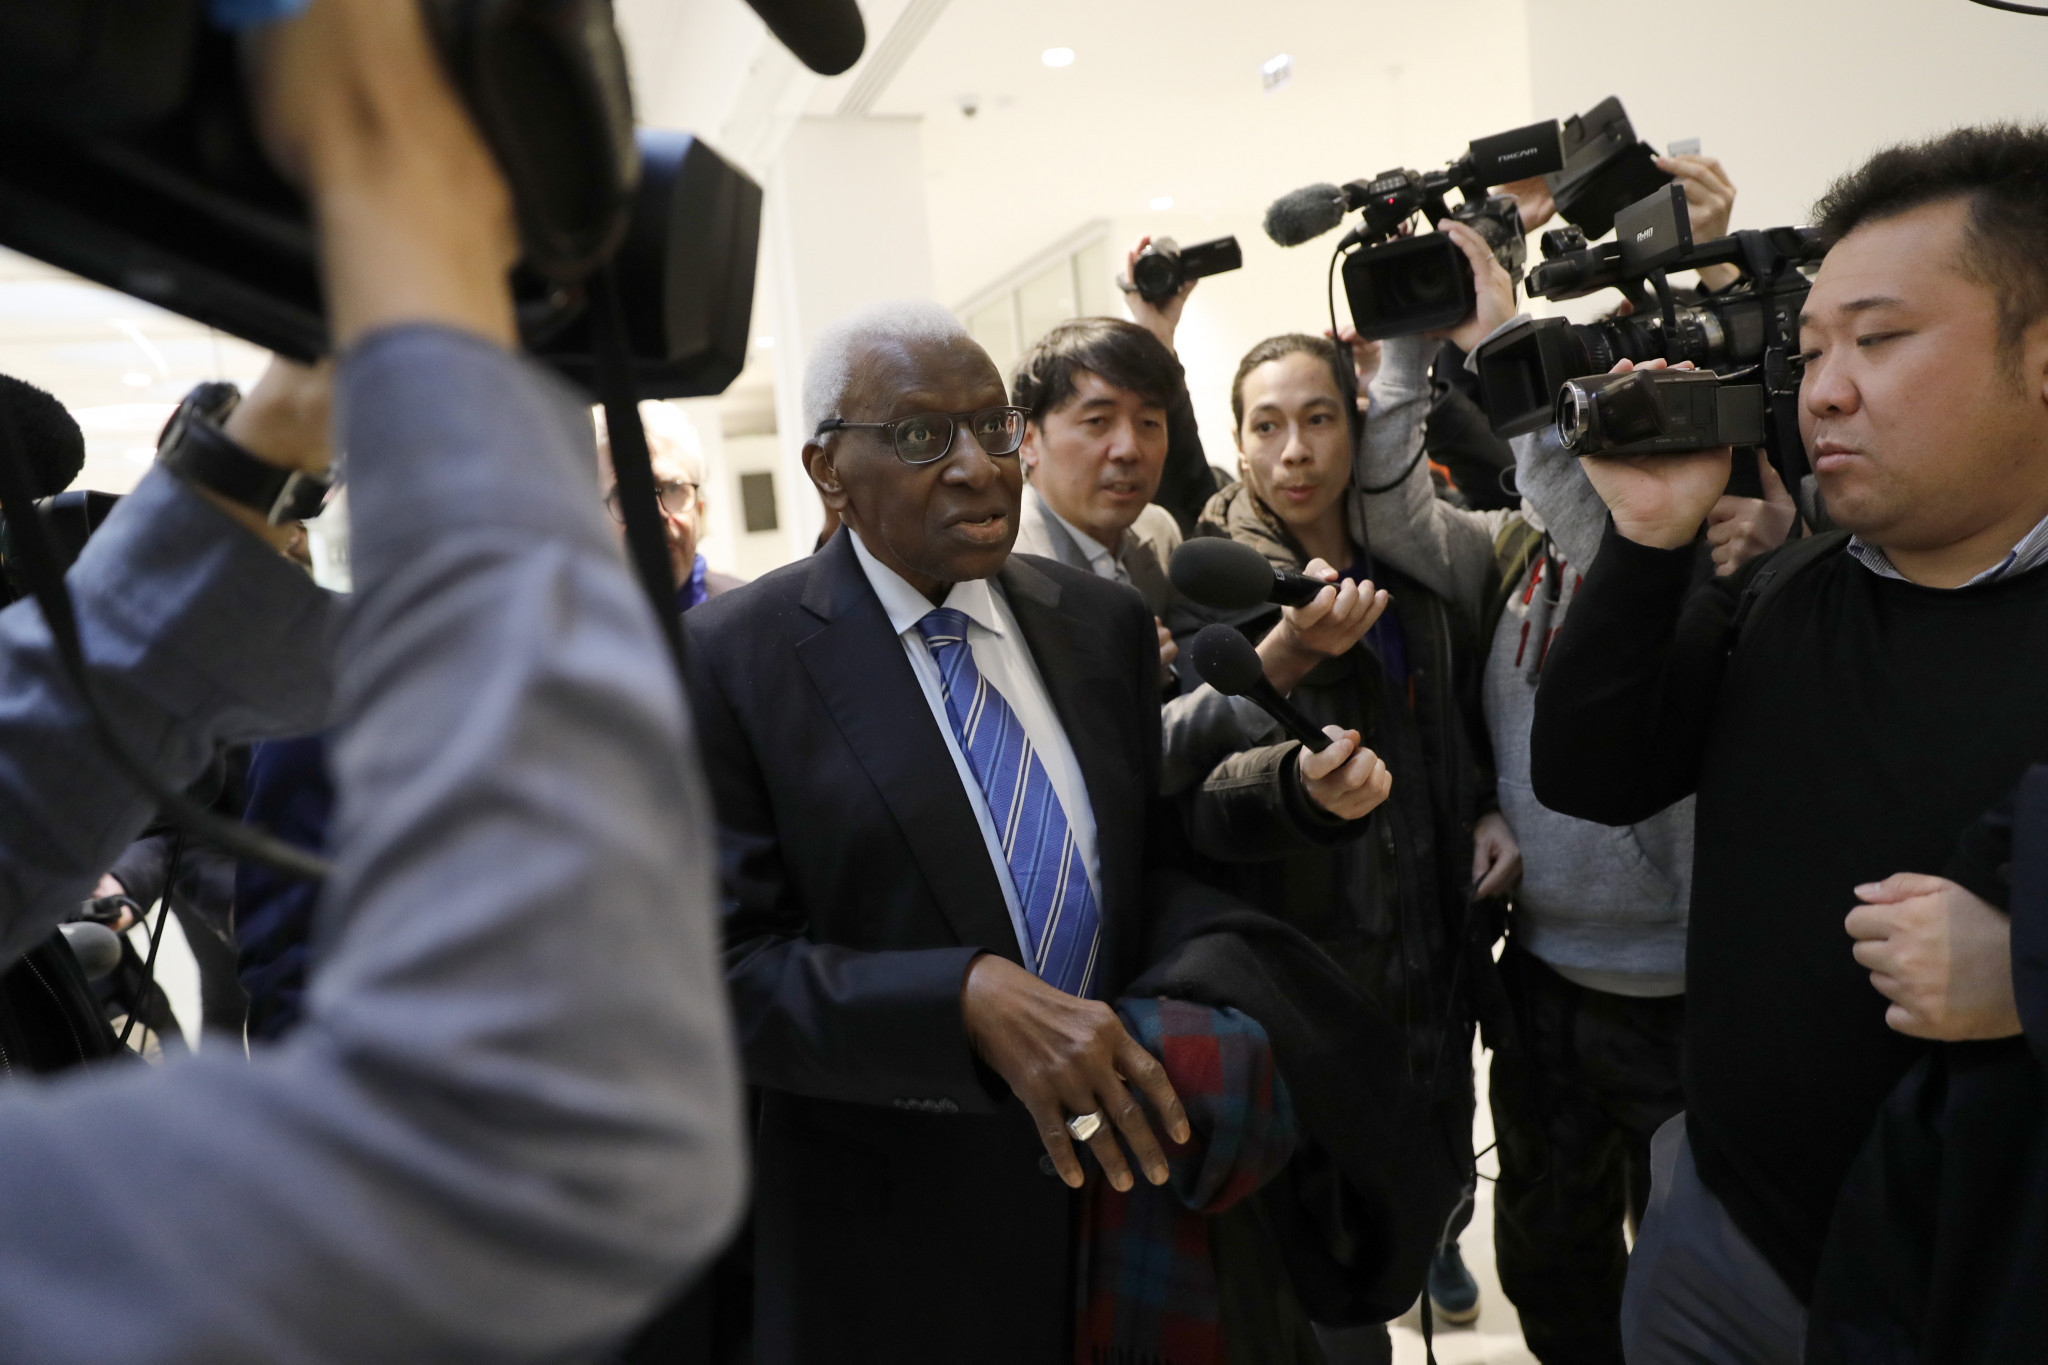 The 86-year-old former IAAF President attending today's hearing in Paris ©Getty Images